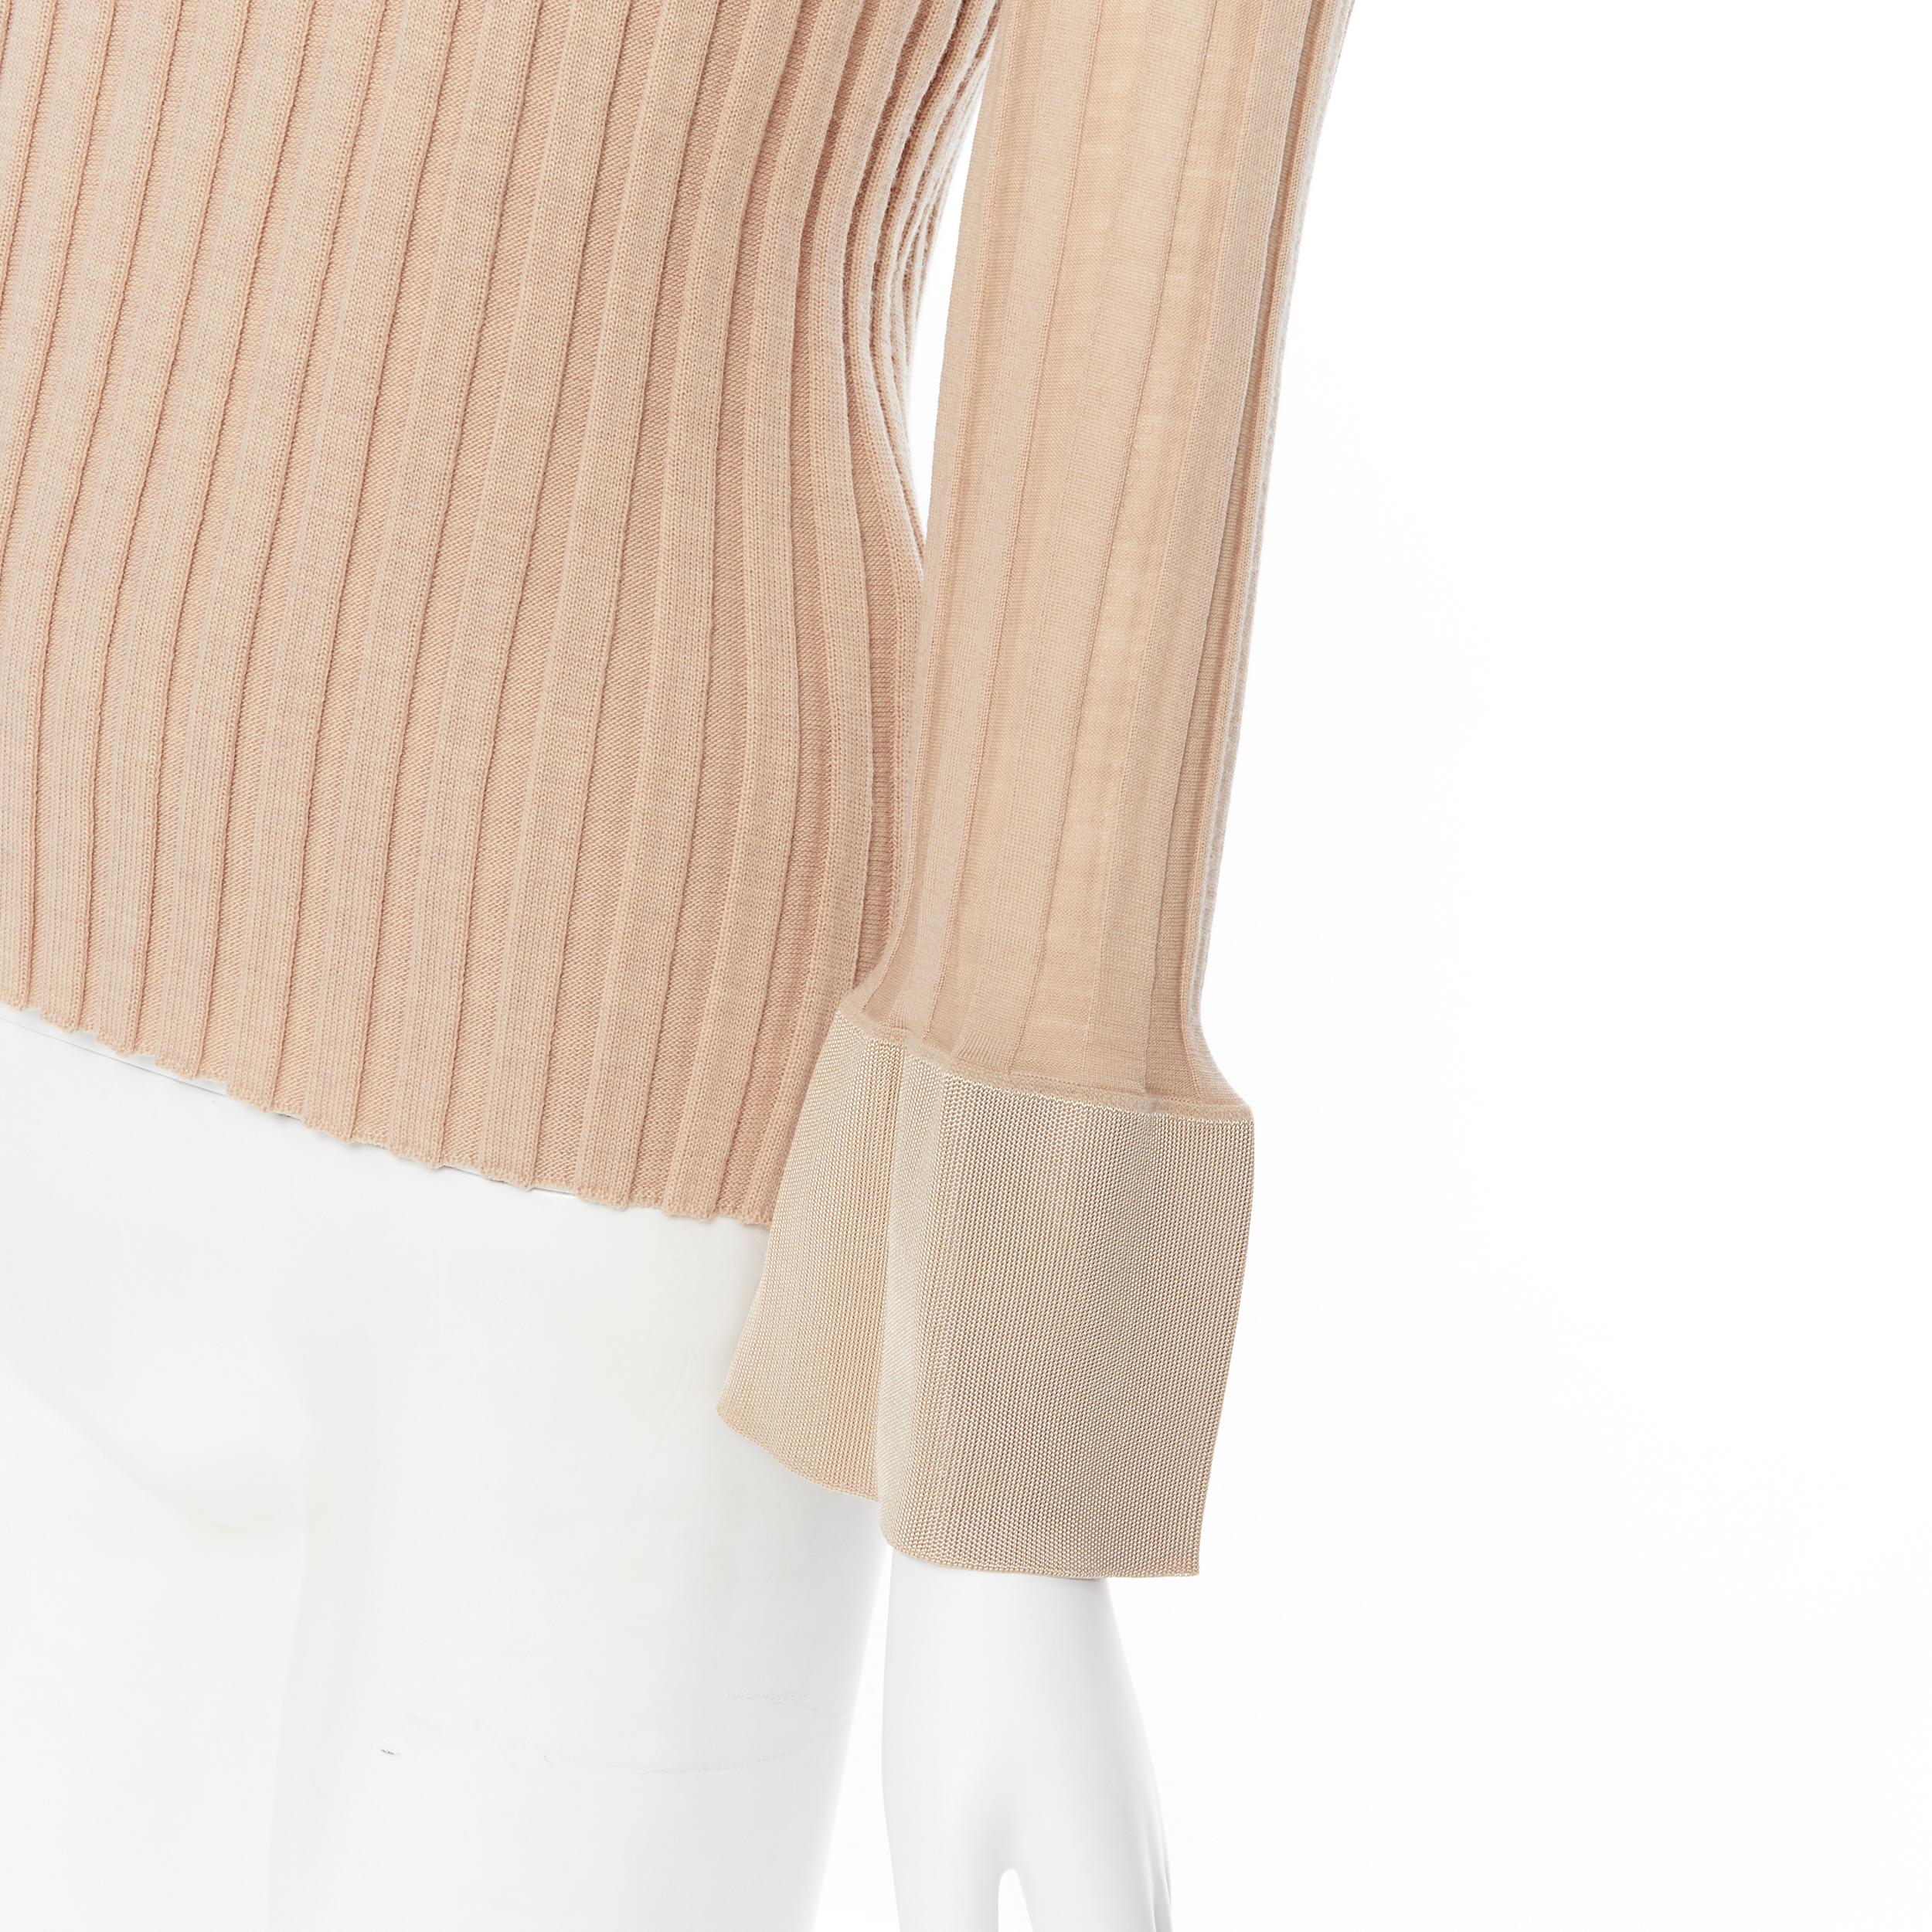 runway OLD CELINE Phoebe Philo beige ribbed knit flared bell cuff sweater top XS 
Reference: SNKO/A00087 
Brand: Celine 
Designer: Phoebe Philo 
Material: Wool 
Color: Beige 
Pattern: Solid 
Extra Detail: Ribbed knit. Contract collar and flared